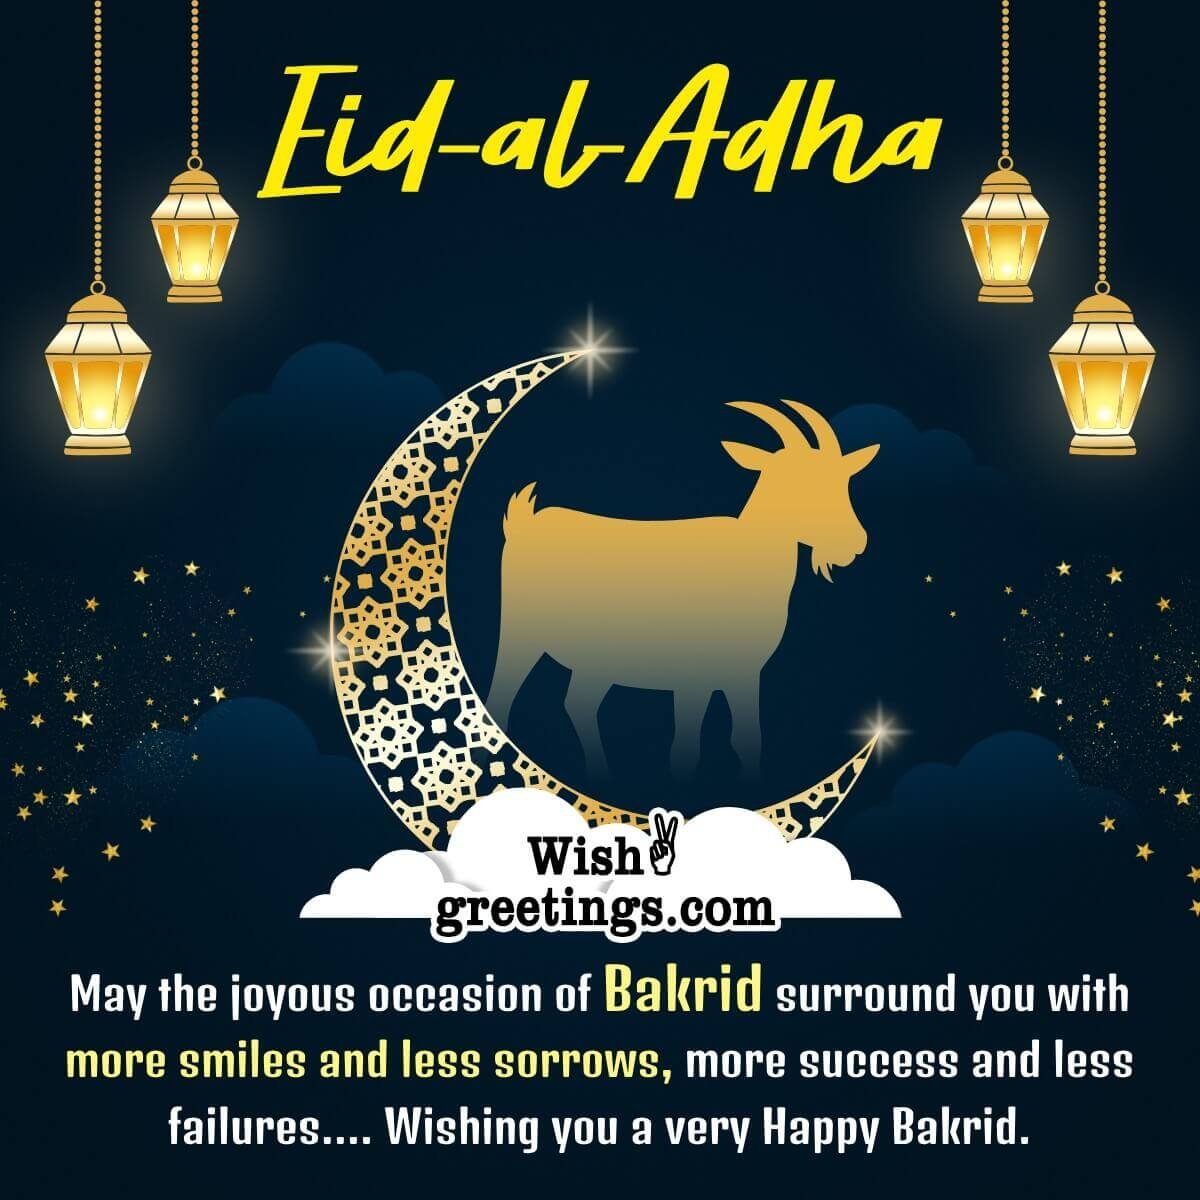 Eid-al-Adha Wishes Messages - Wish Greetings